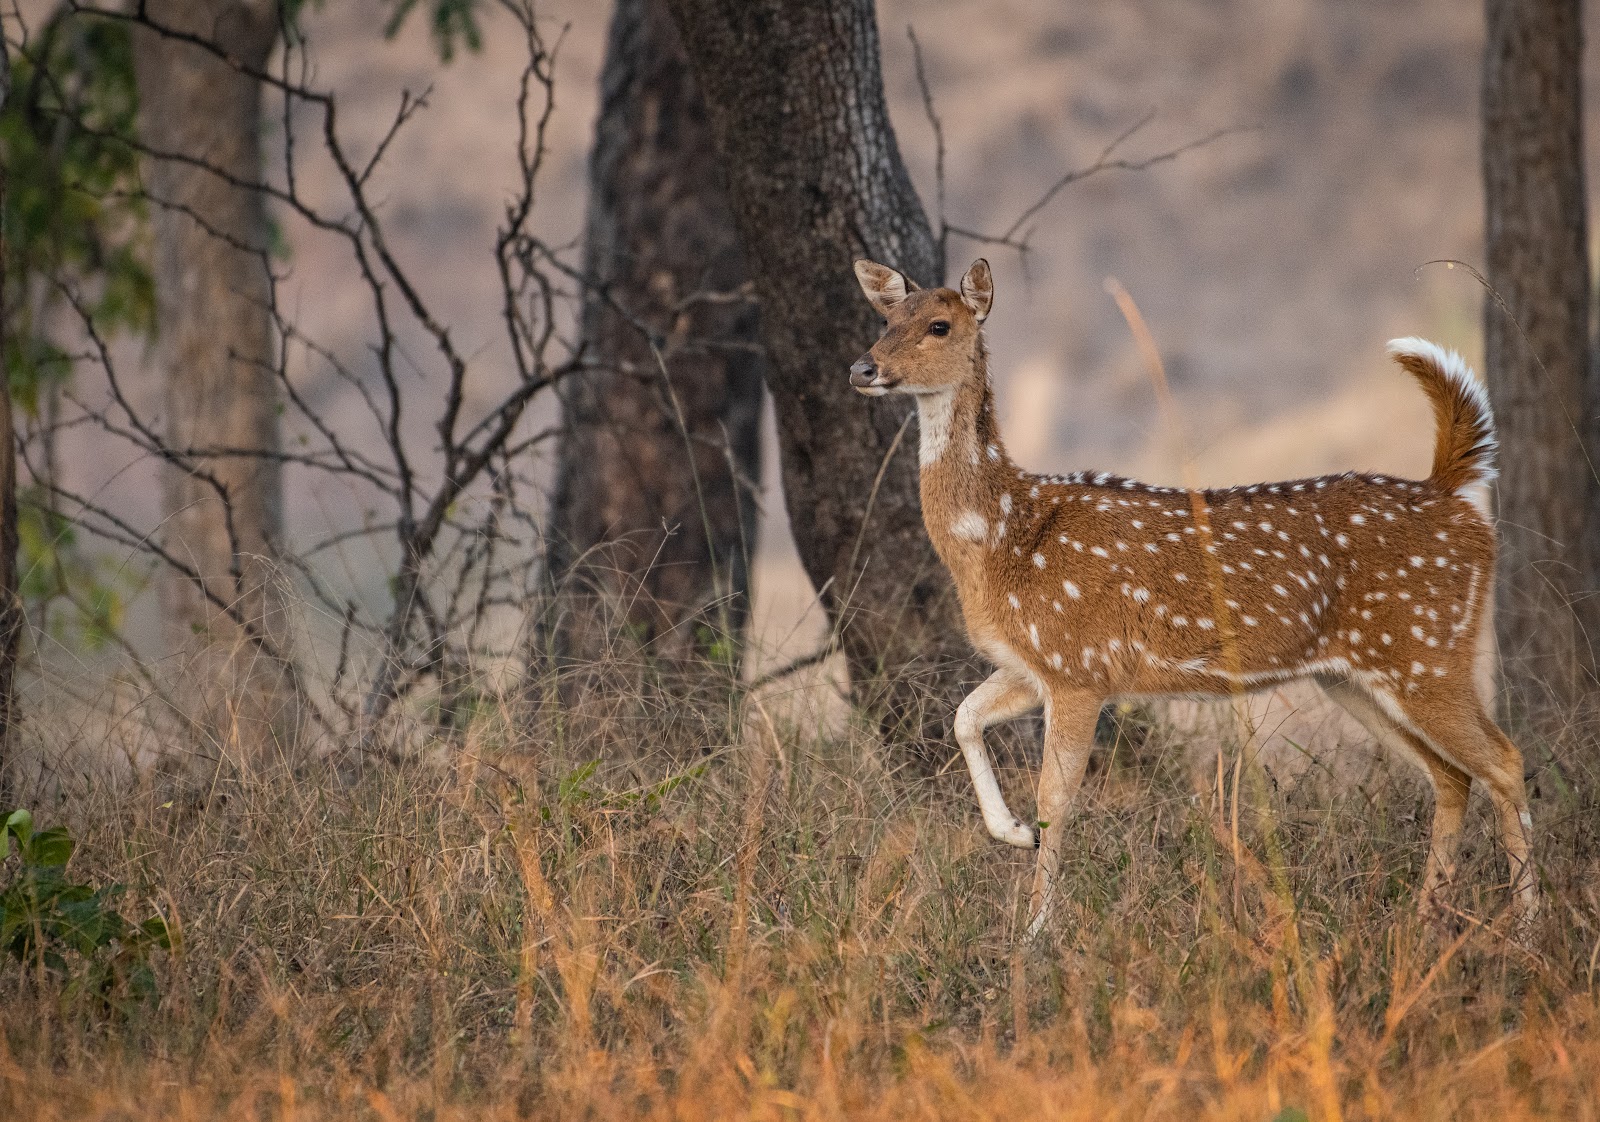 Spotted deer in distress